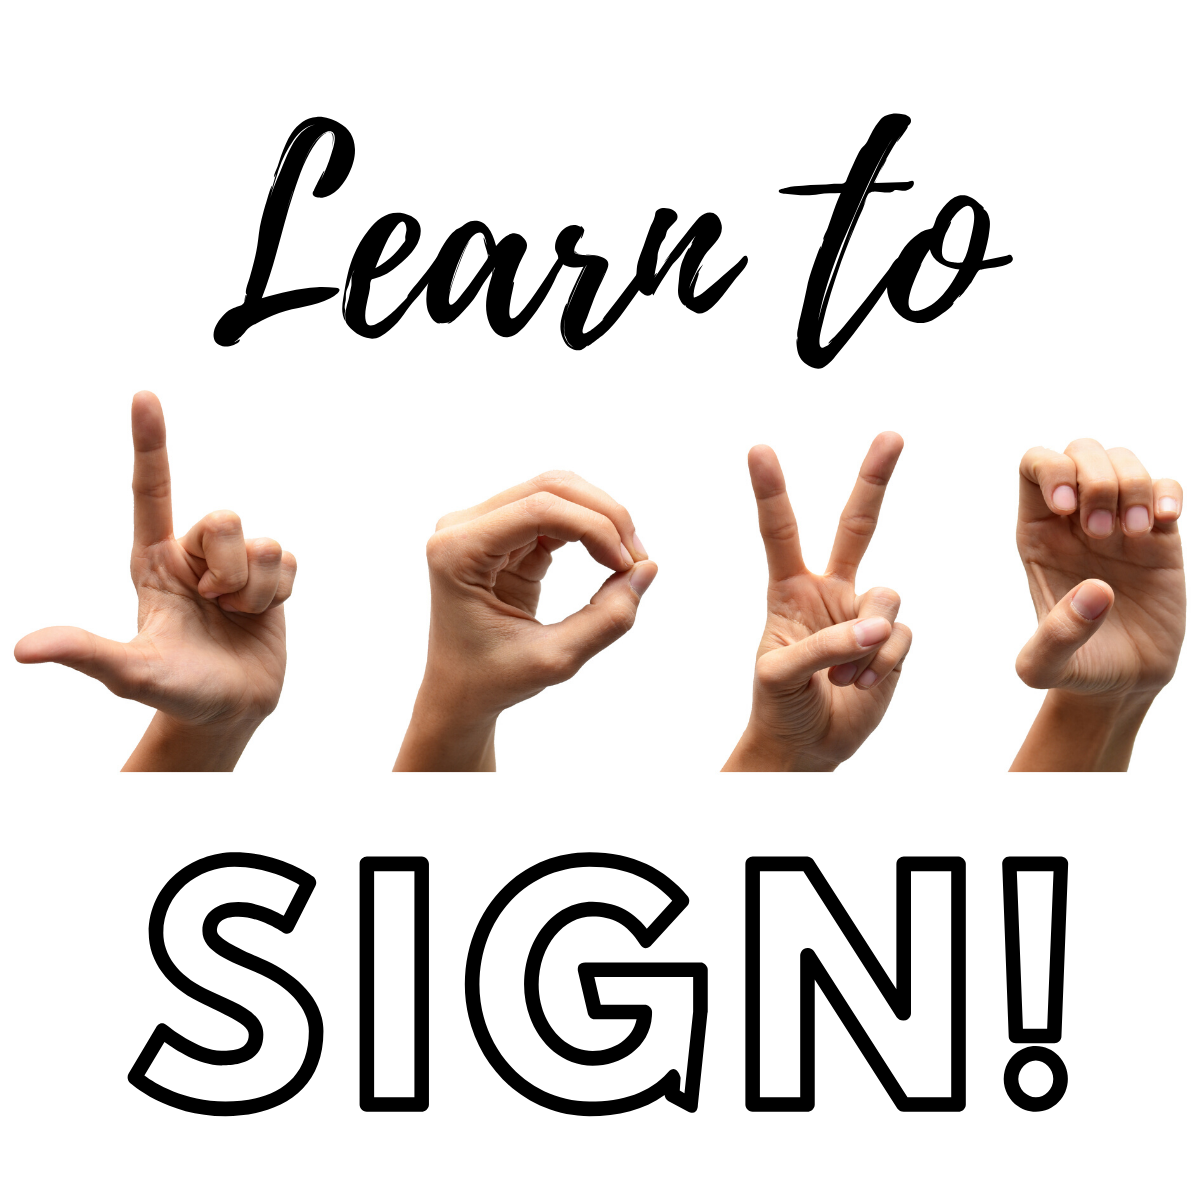 Learn to sign